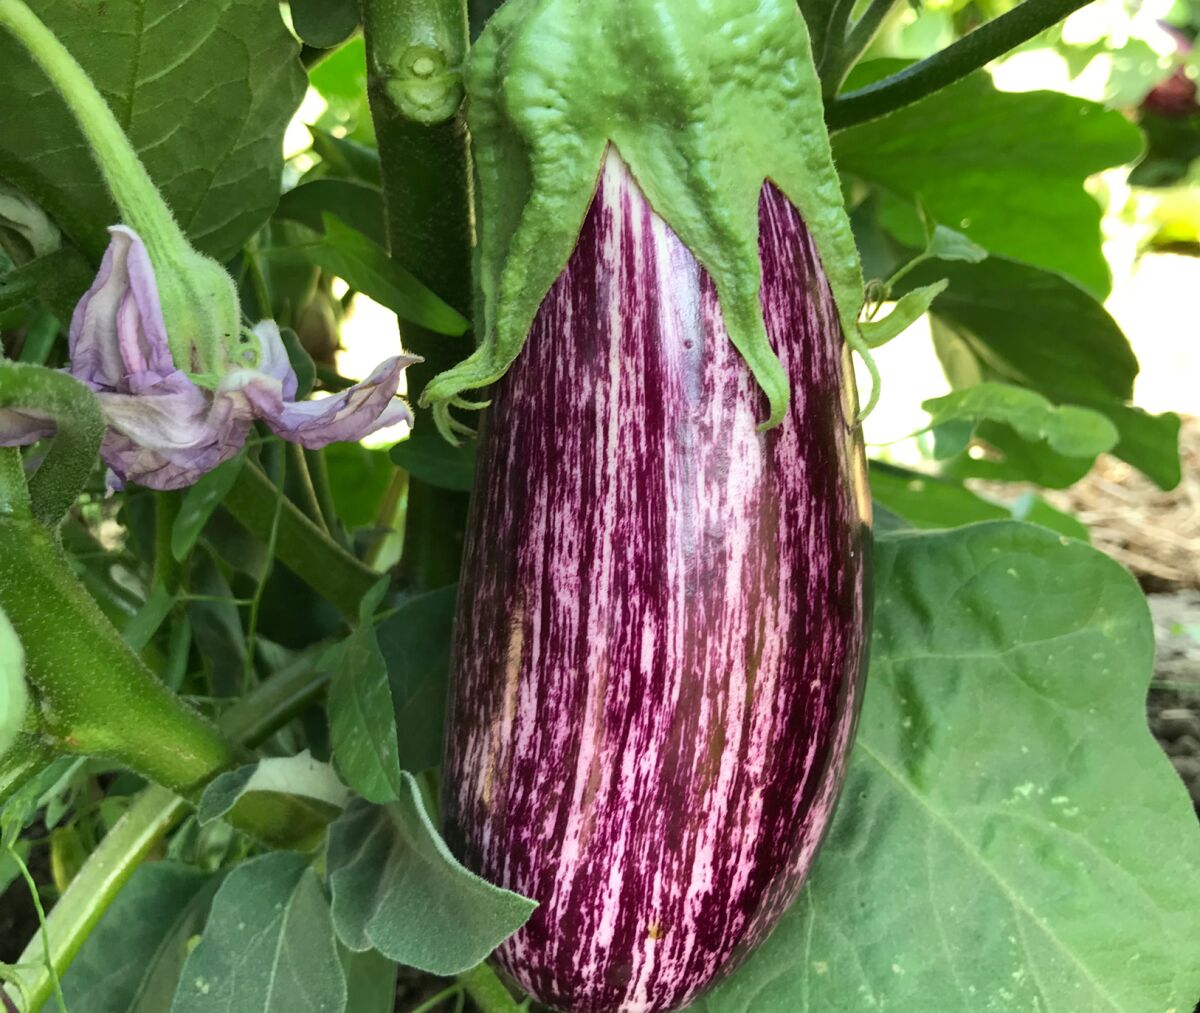 Eggplant ‘Annina’ has 5-inch-long fruits that are streaked with cream and purple.